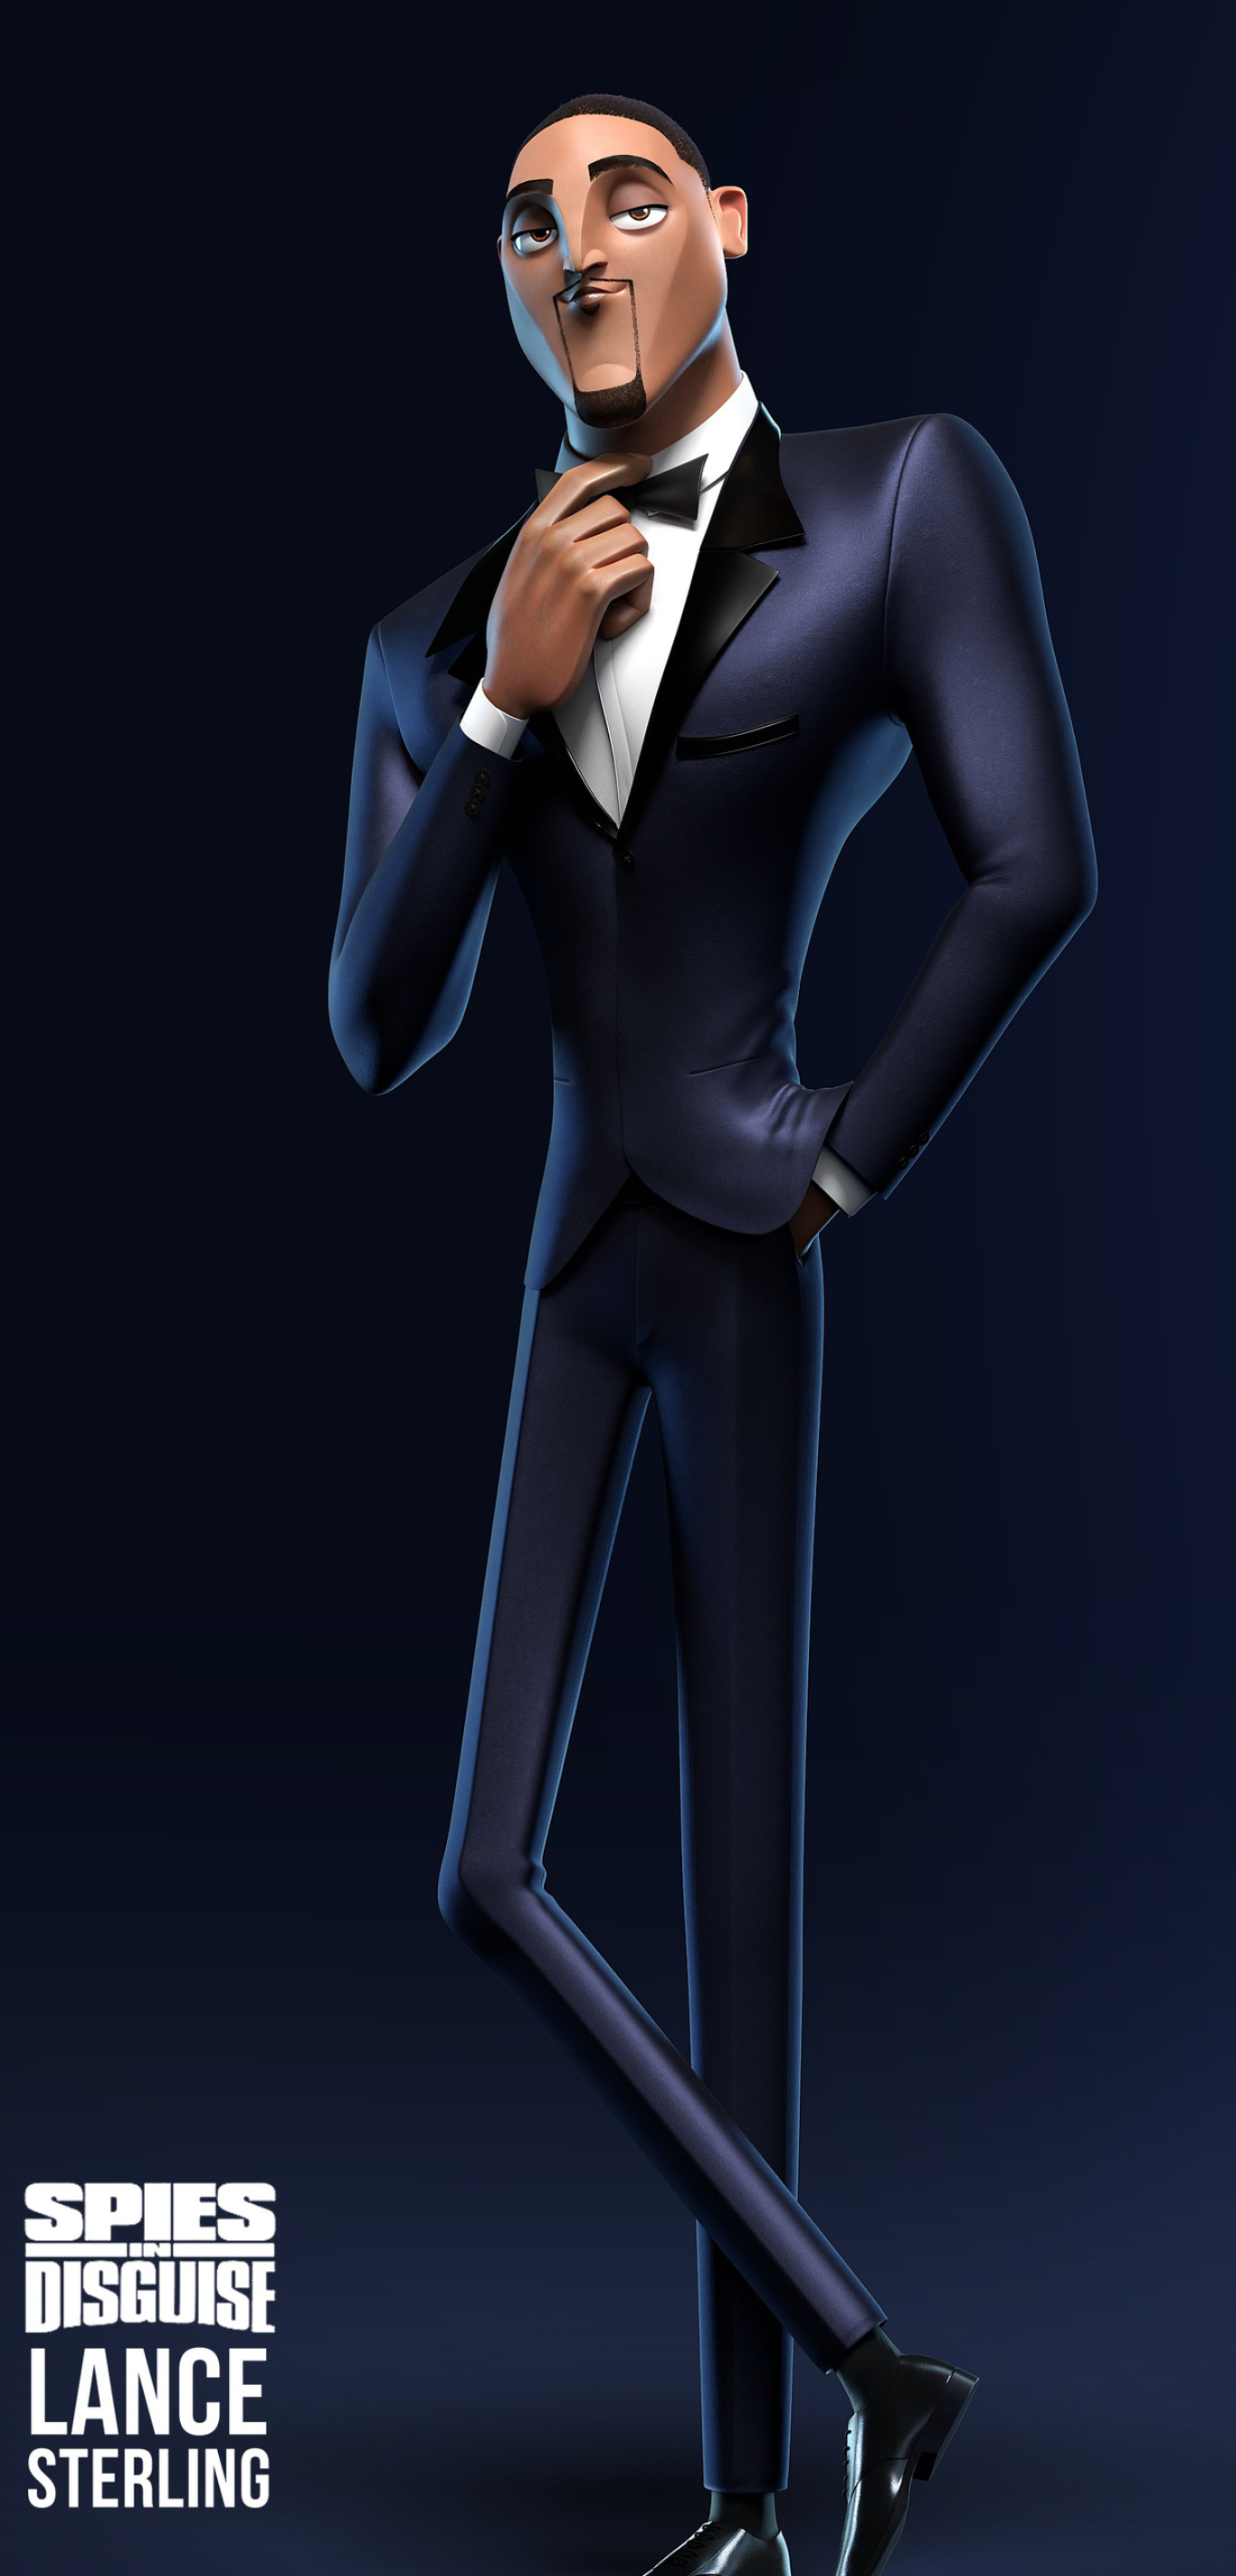 Spies in Disguise Animation, Lance Sterling character art, 3D CG Society, Stunning character design, 1370x2850 HD Handy